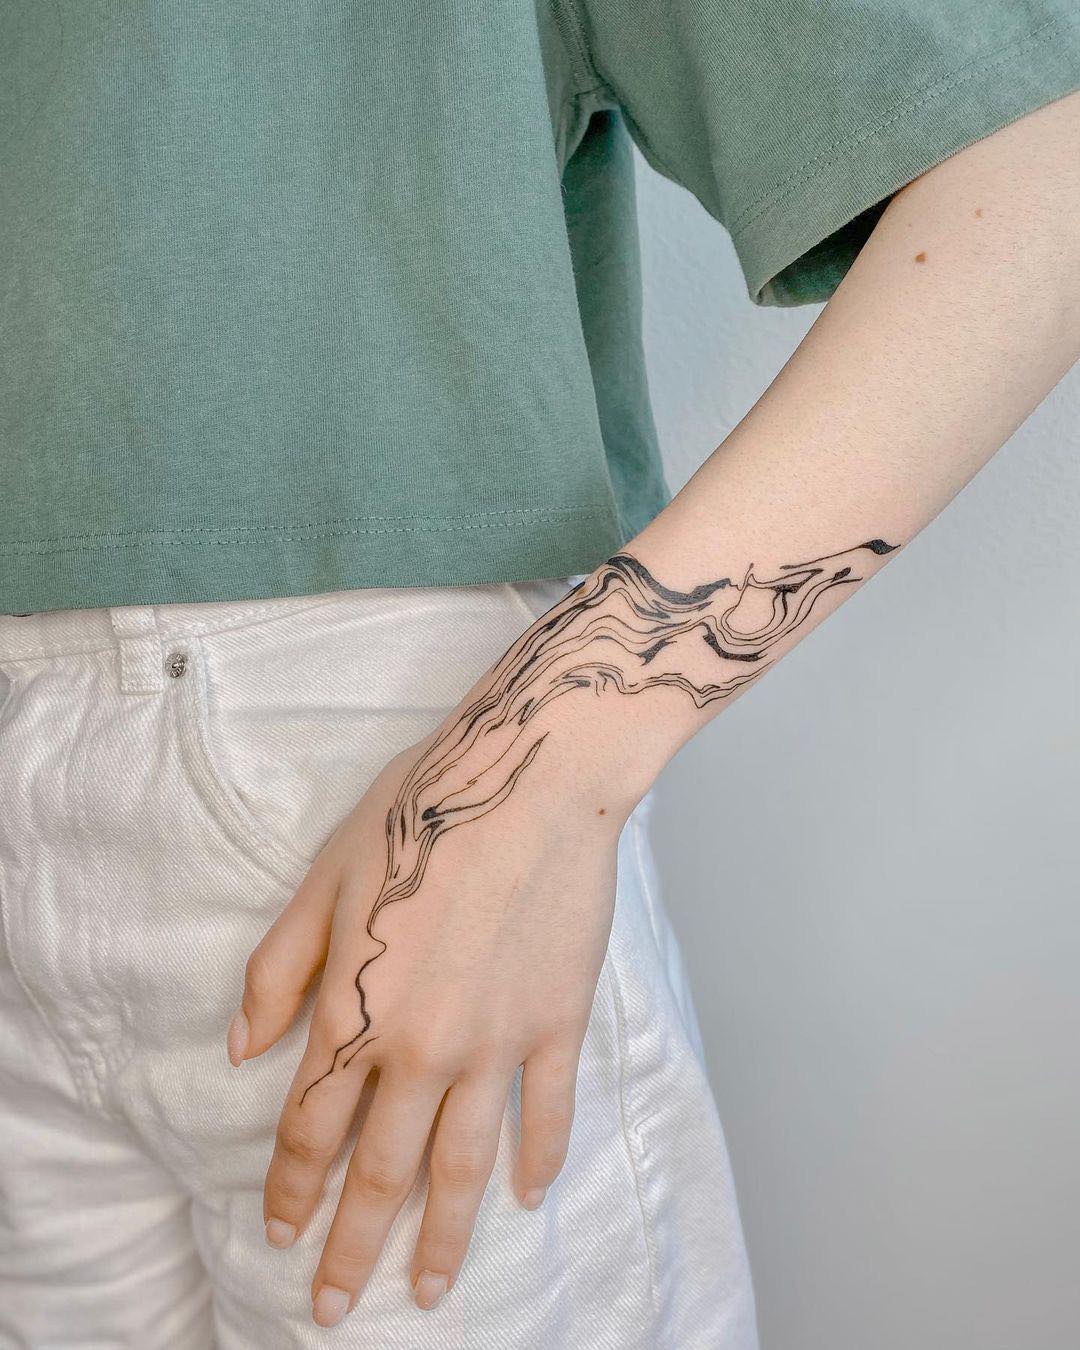 Beautiful abstract tattoo on hand by liza from kingst.collective